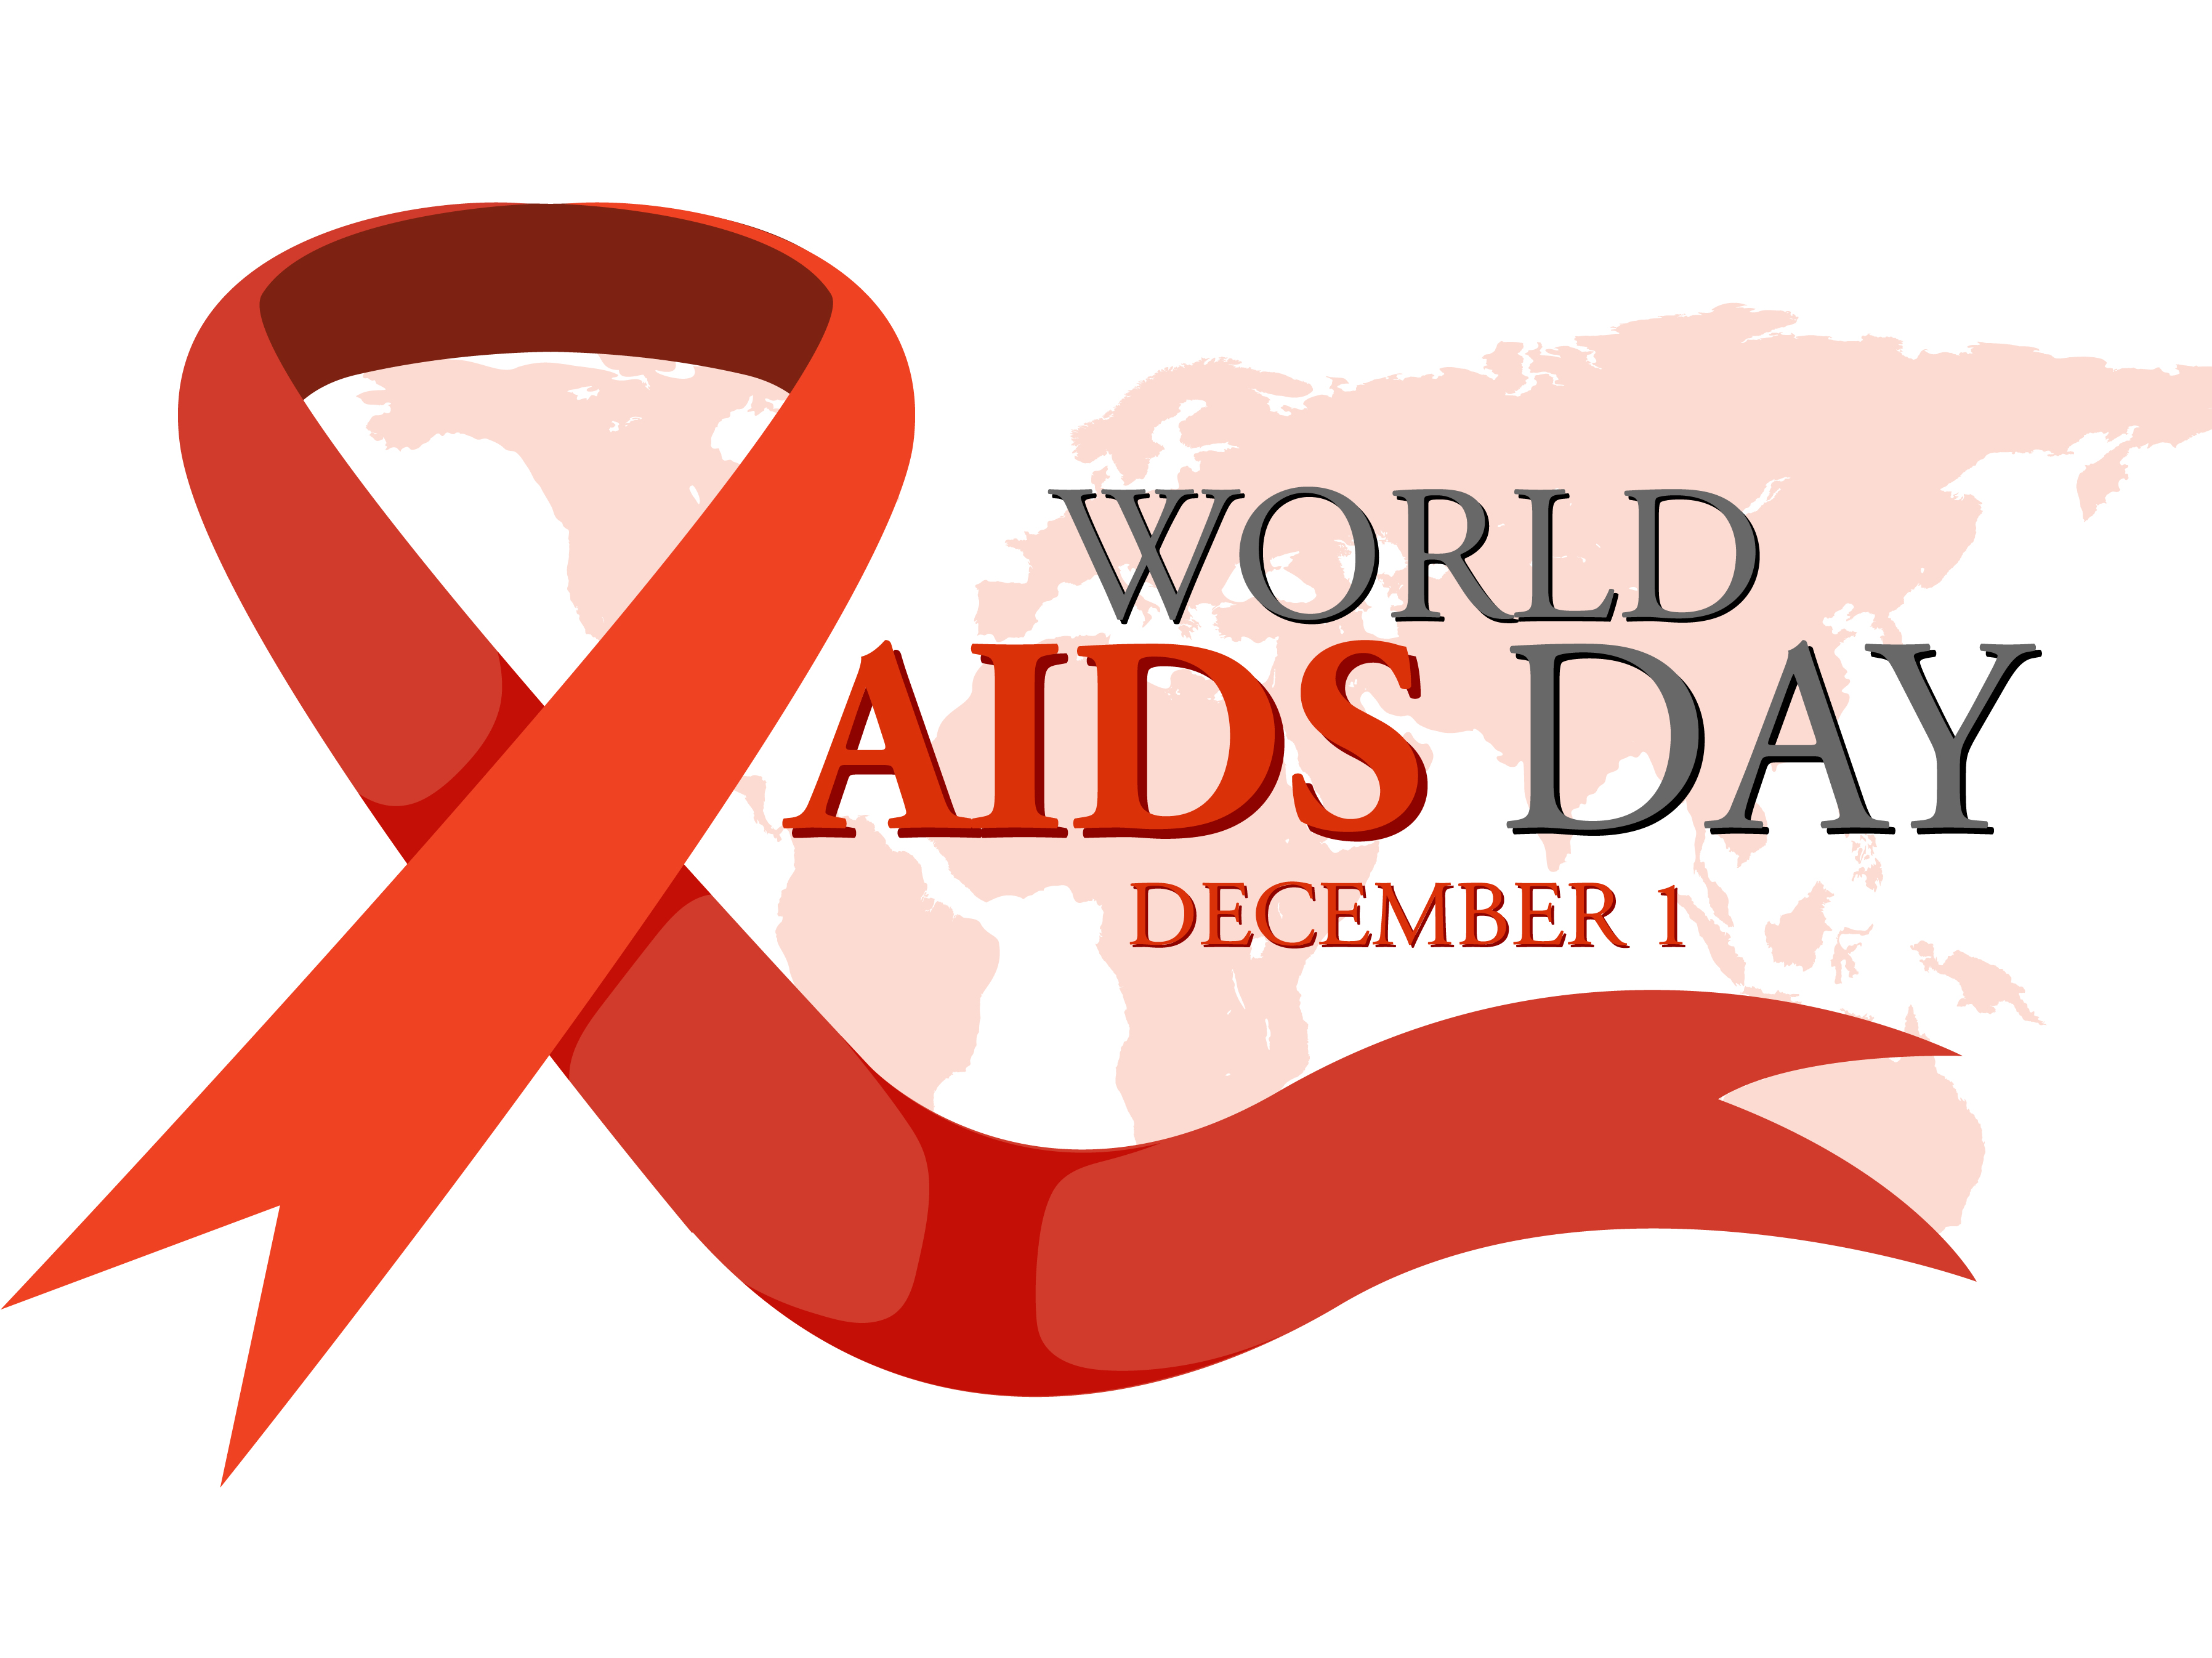 World AIDS Day today under the theme ”Let communities lead”